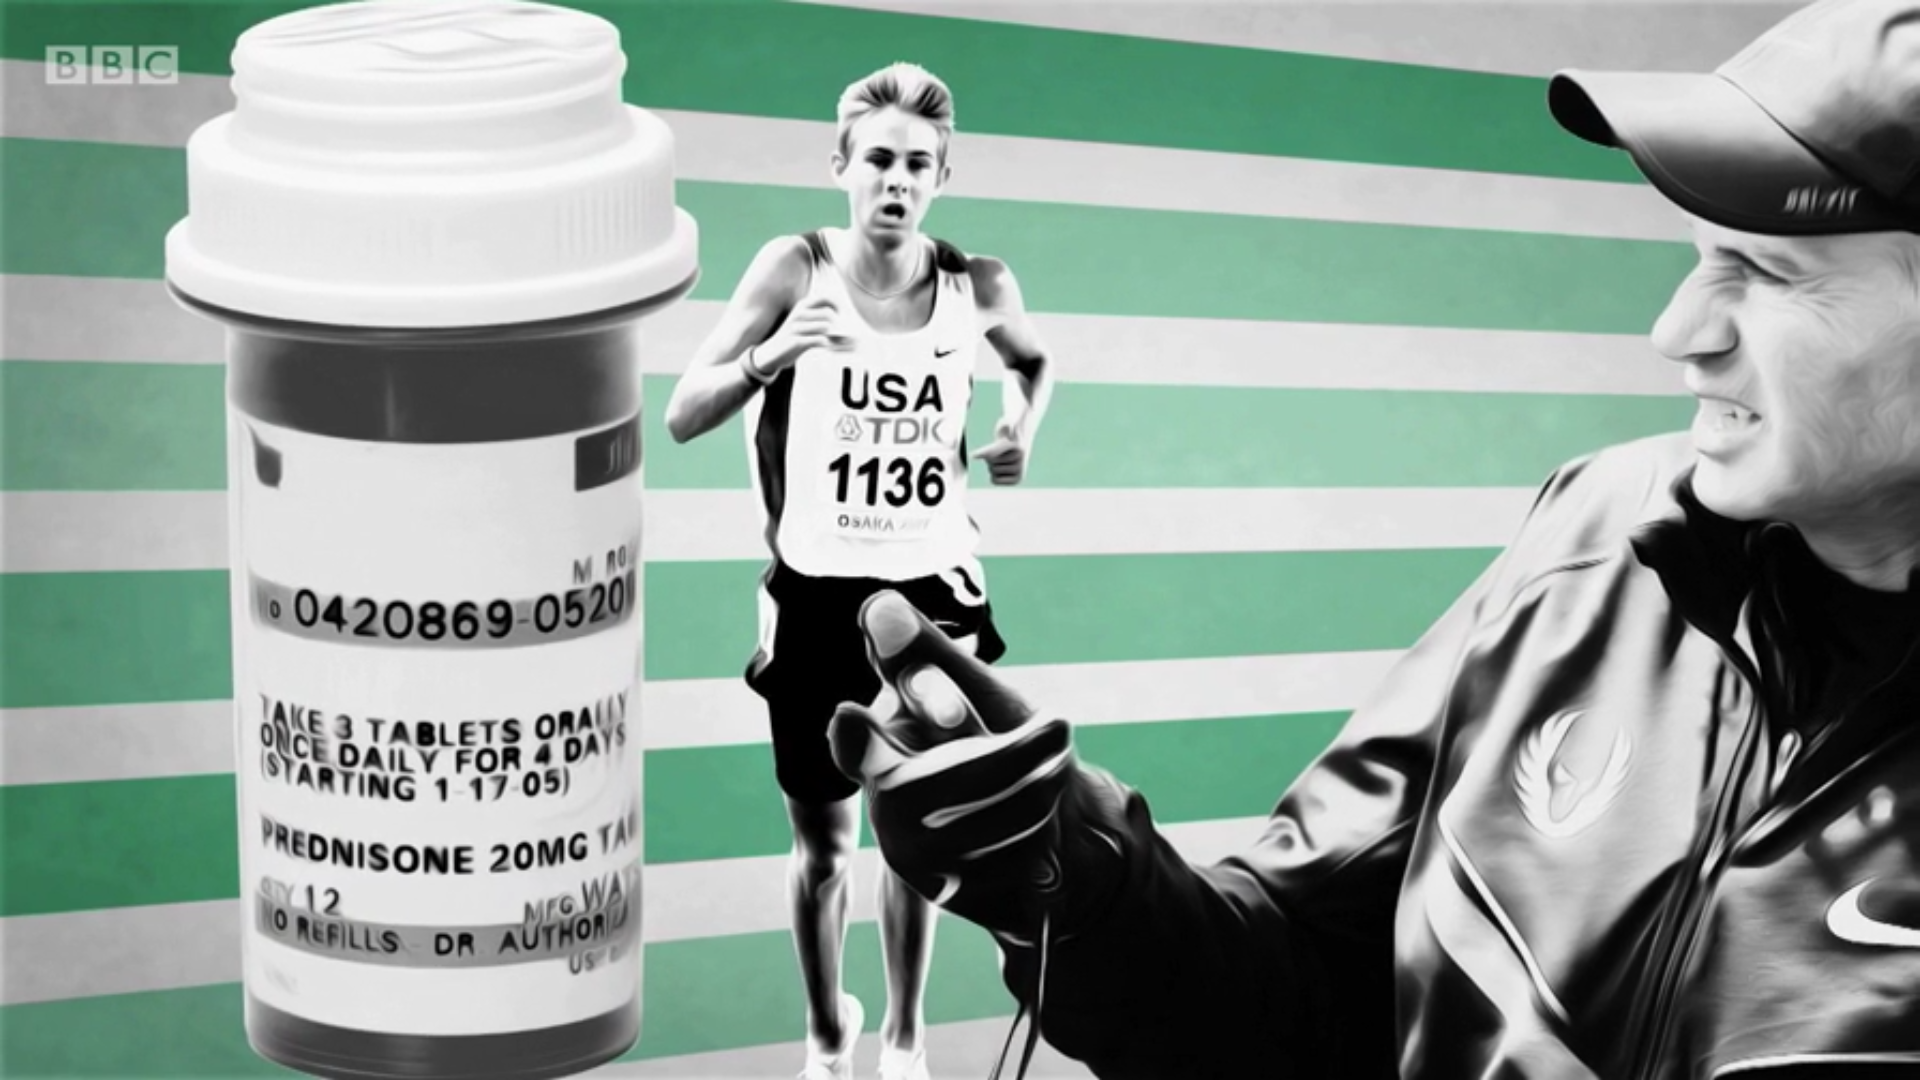 Everything You Want Know About BBC Nike Oregon Project Doping Documentary If You Didn't See -